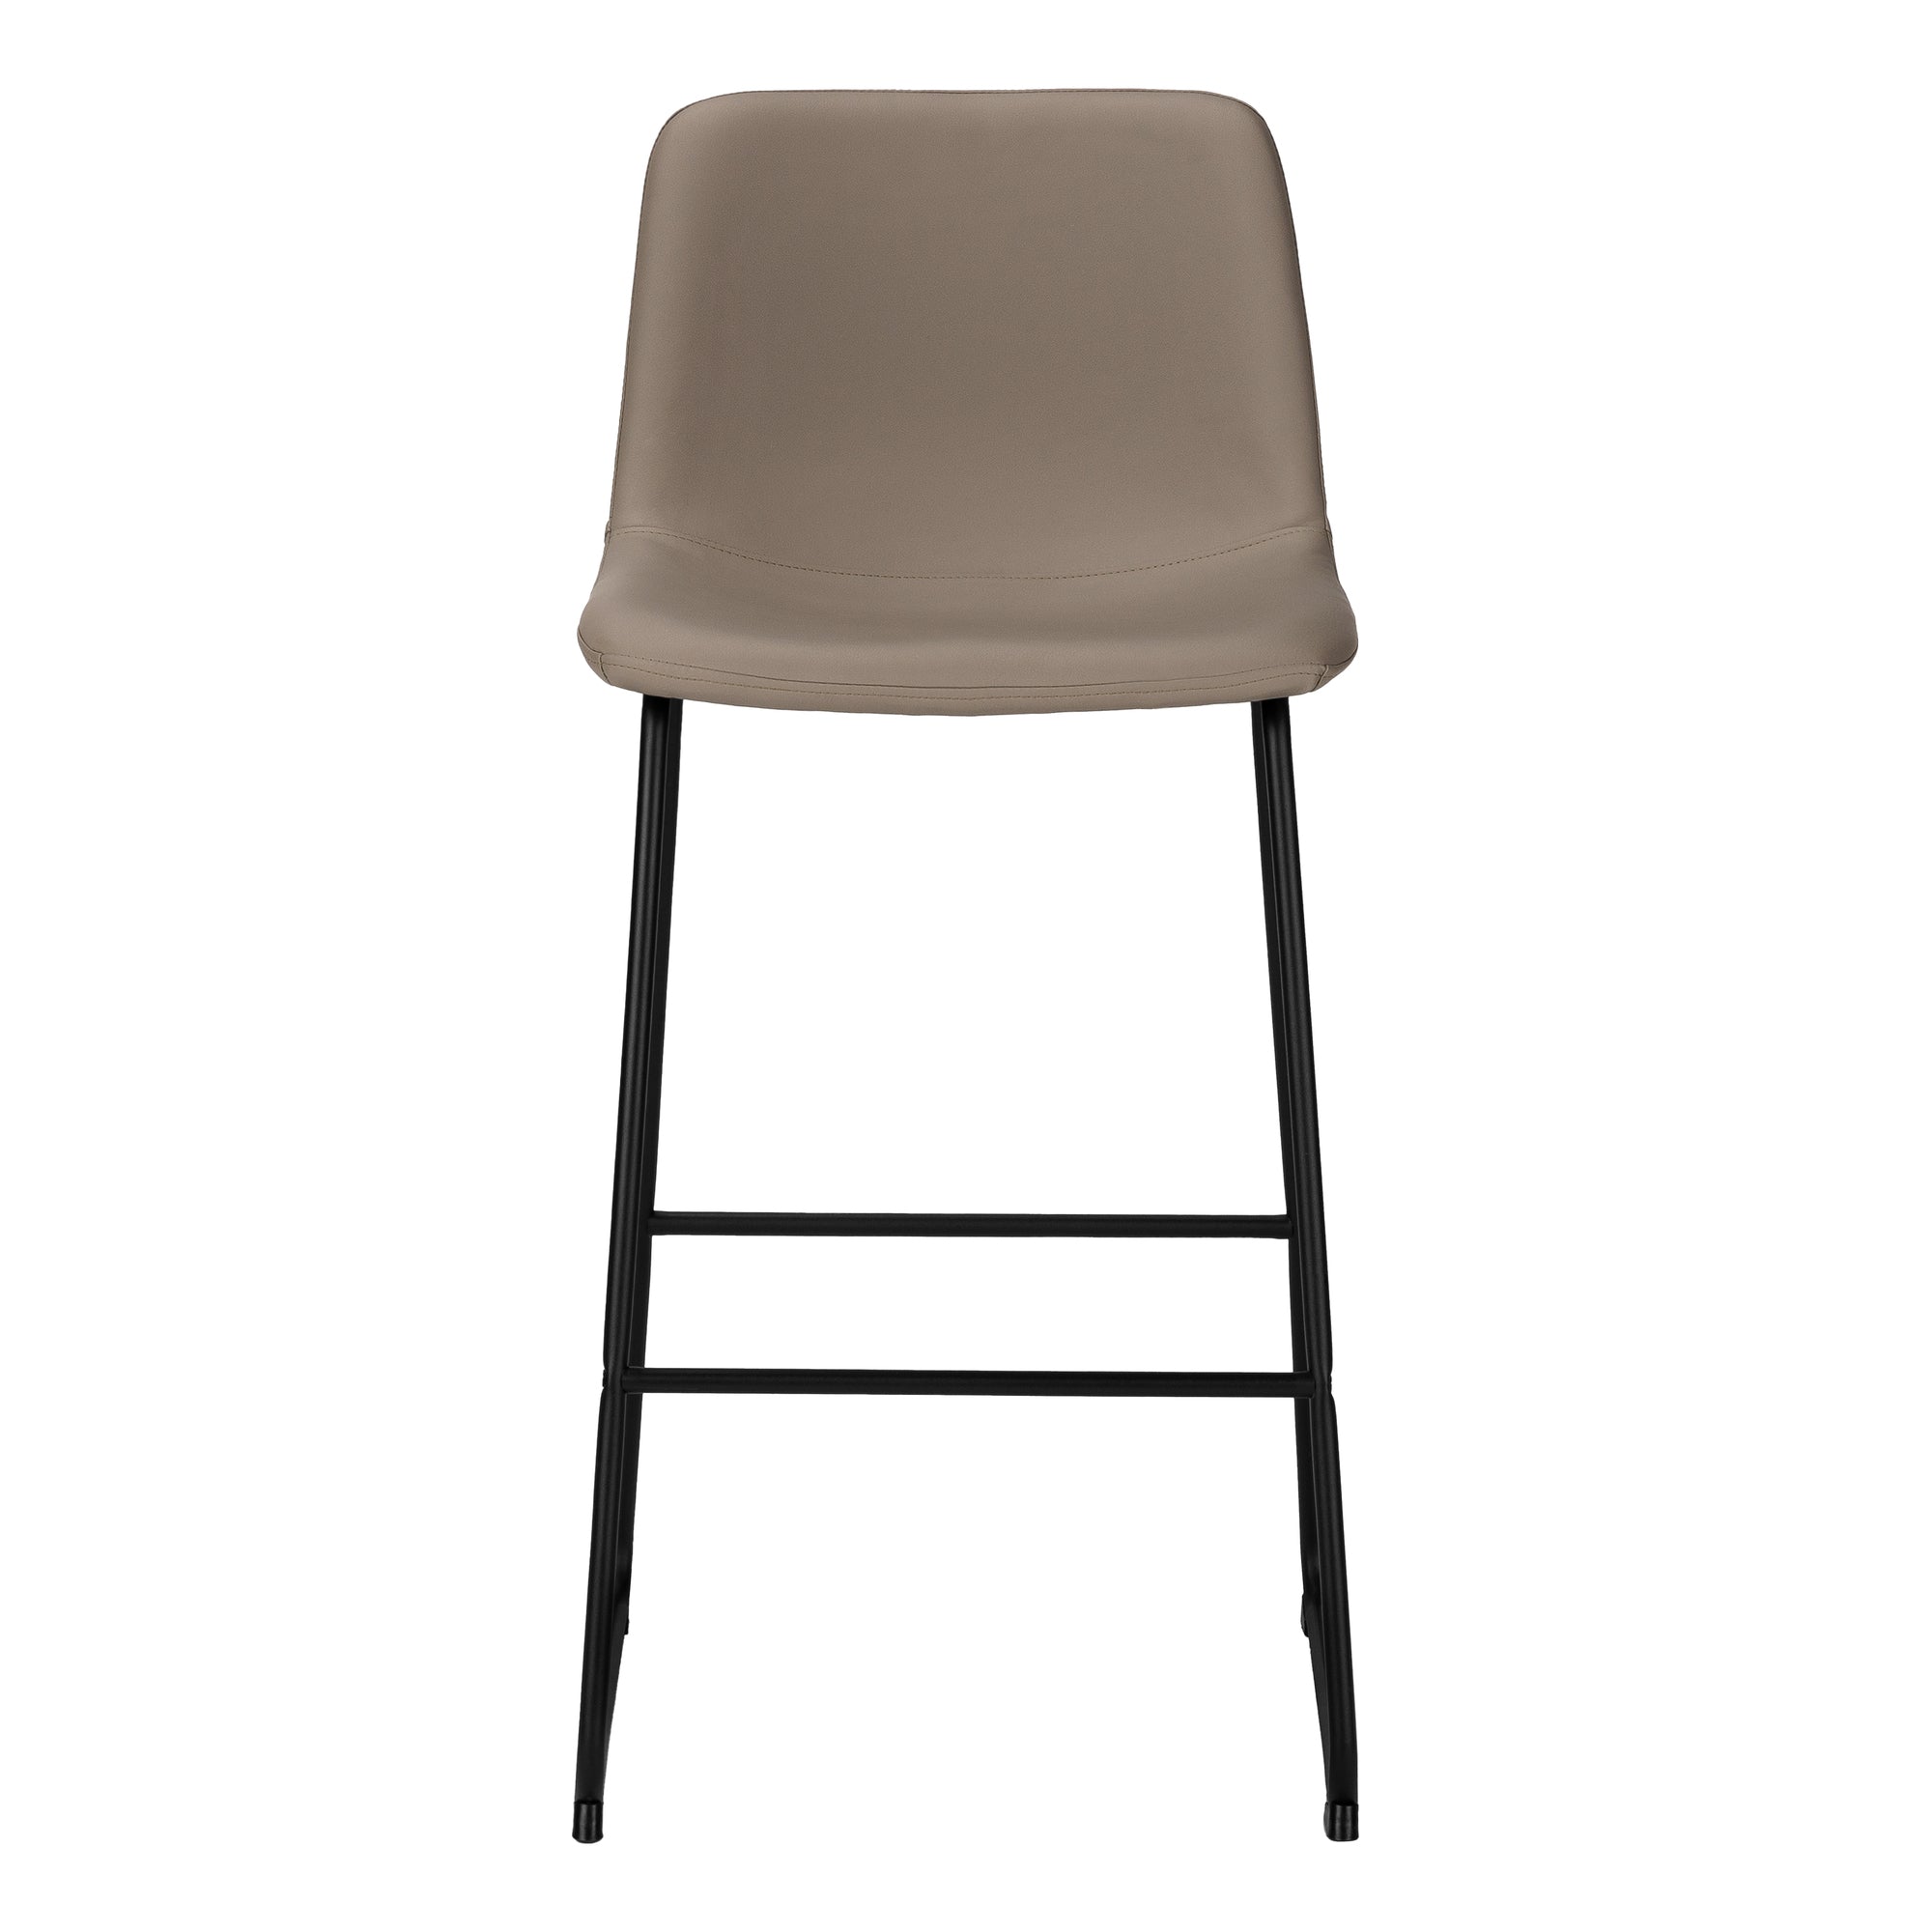 MN-107751    Office Chair - Standing Desk, Metal Frame, Curved Backrest,  Taupe Leather-Look,  Black